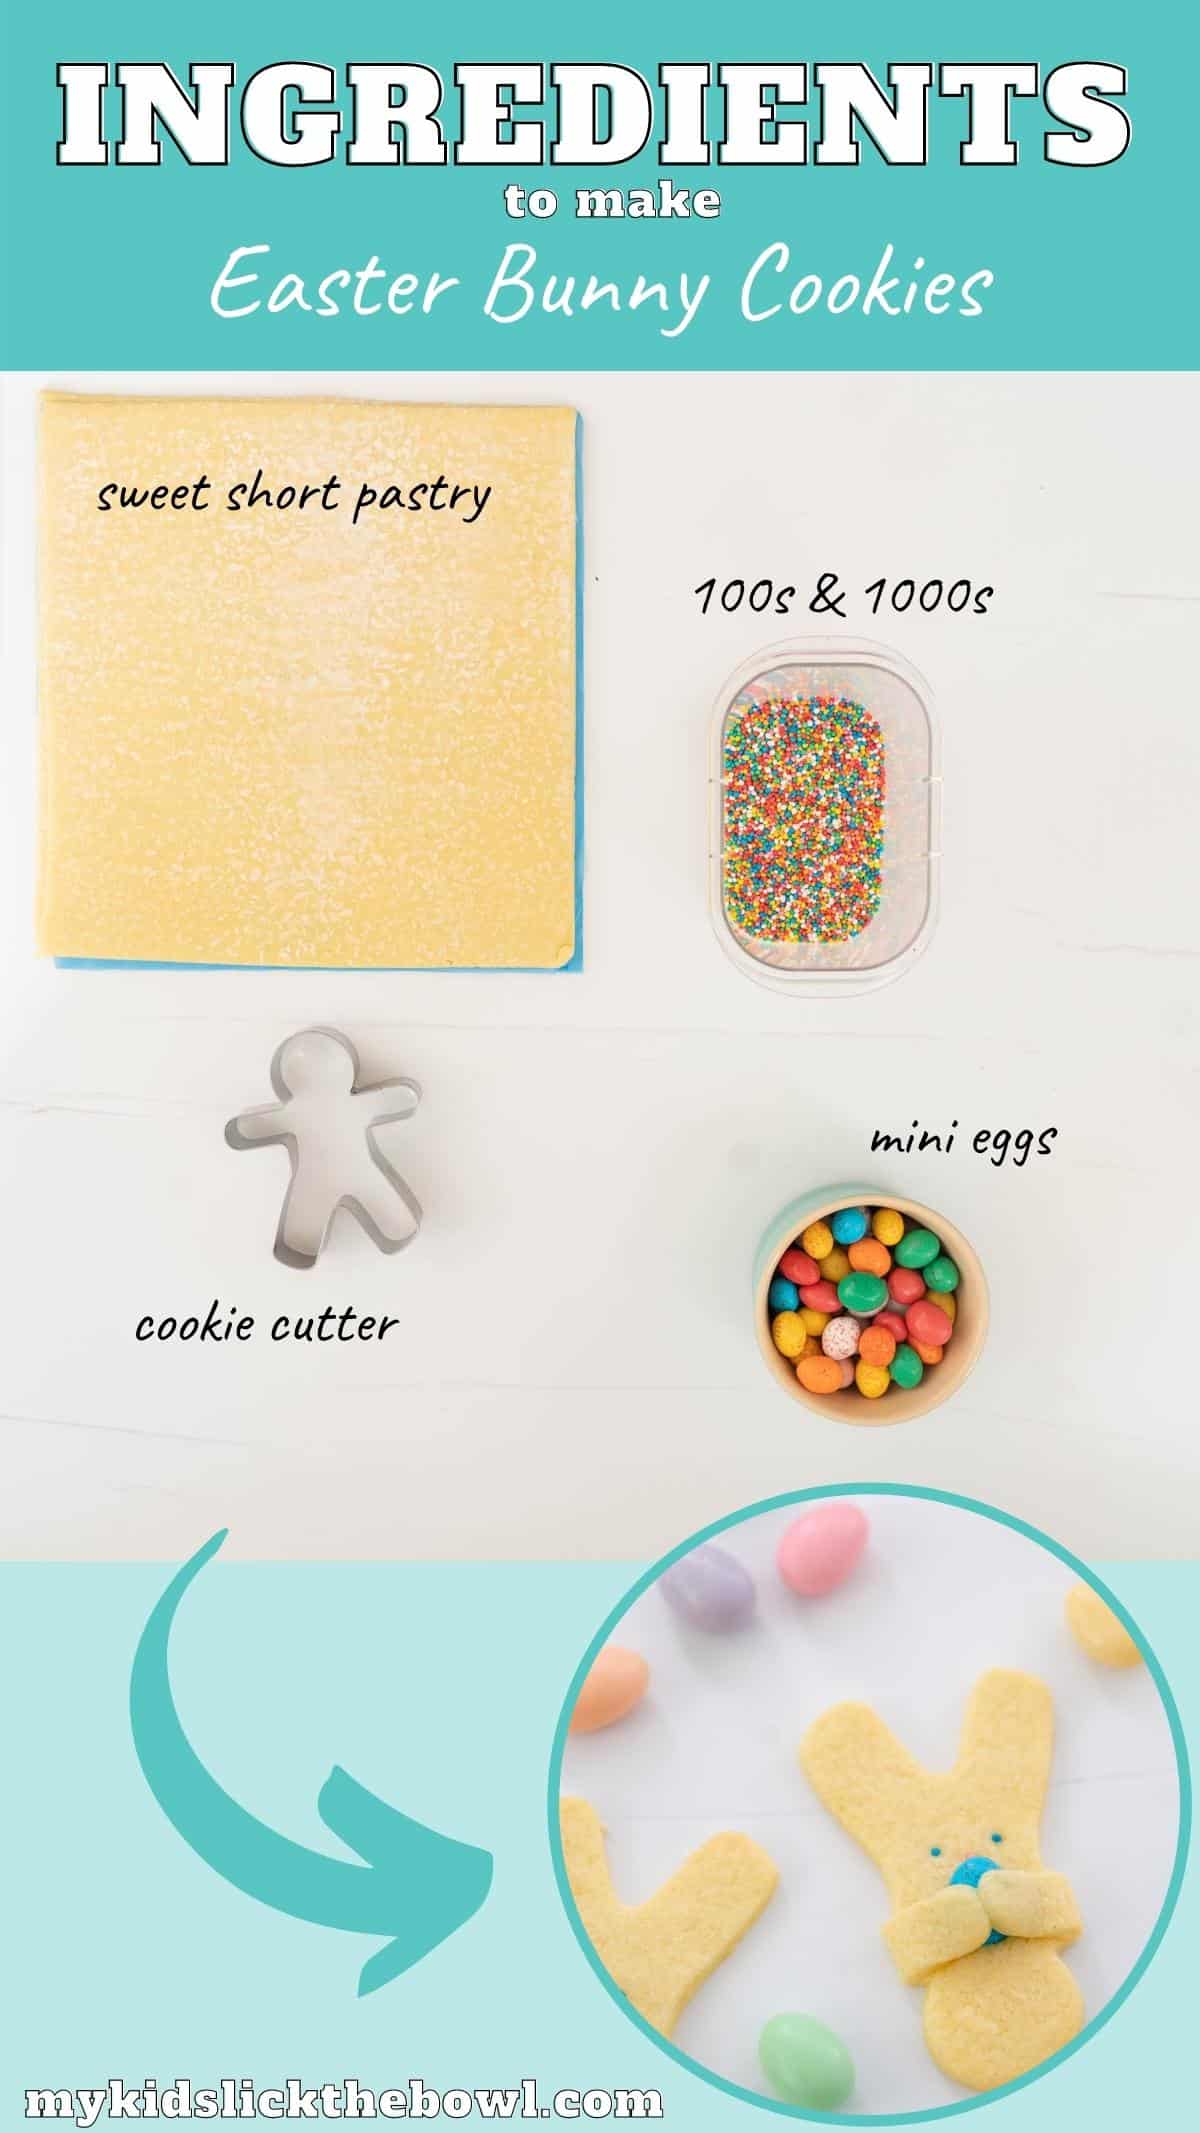 The ingredients to make easter bunny cookies laid out on a bench top with text overlay.